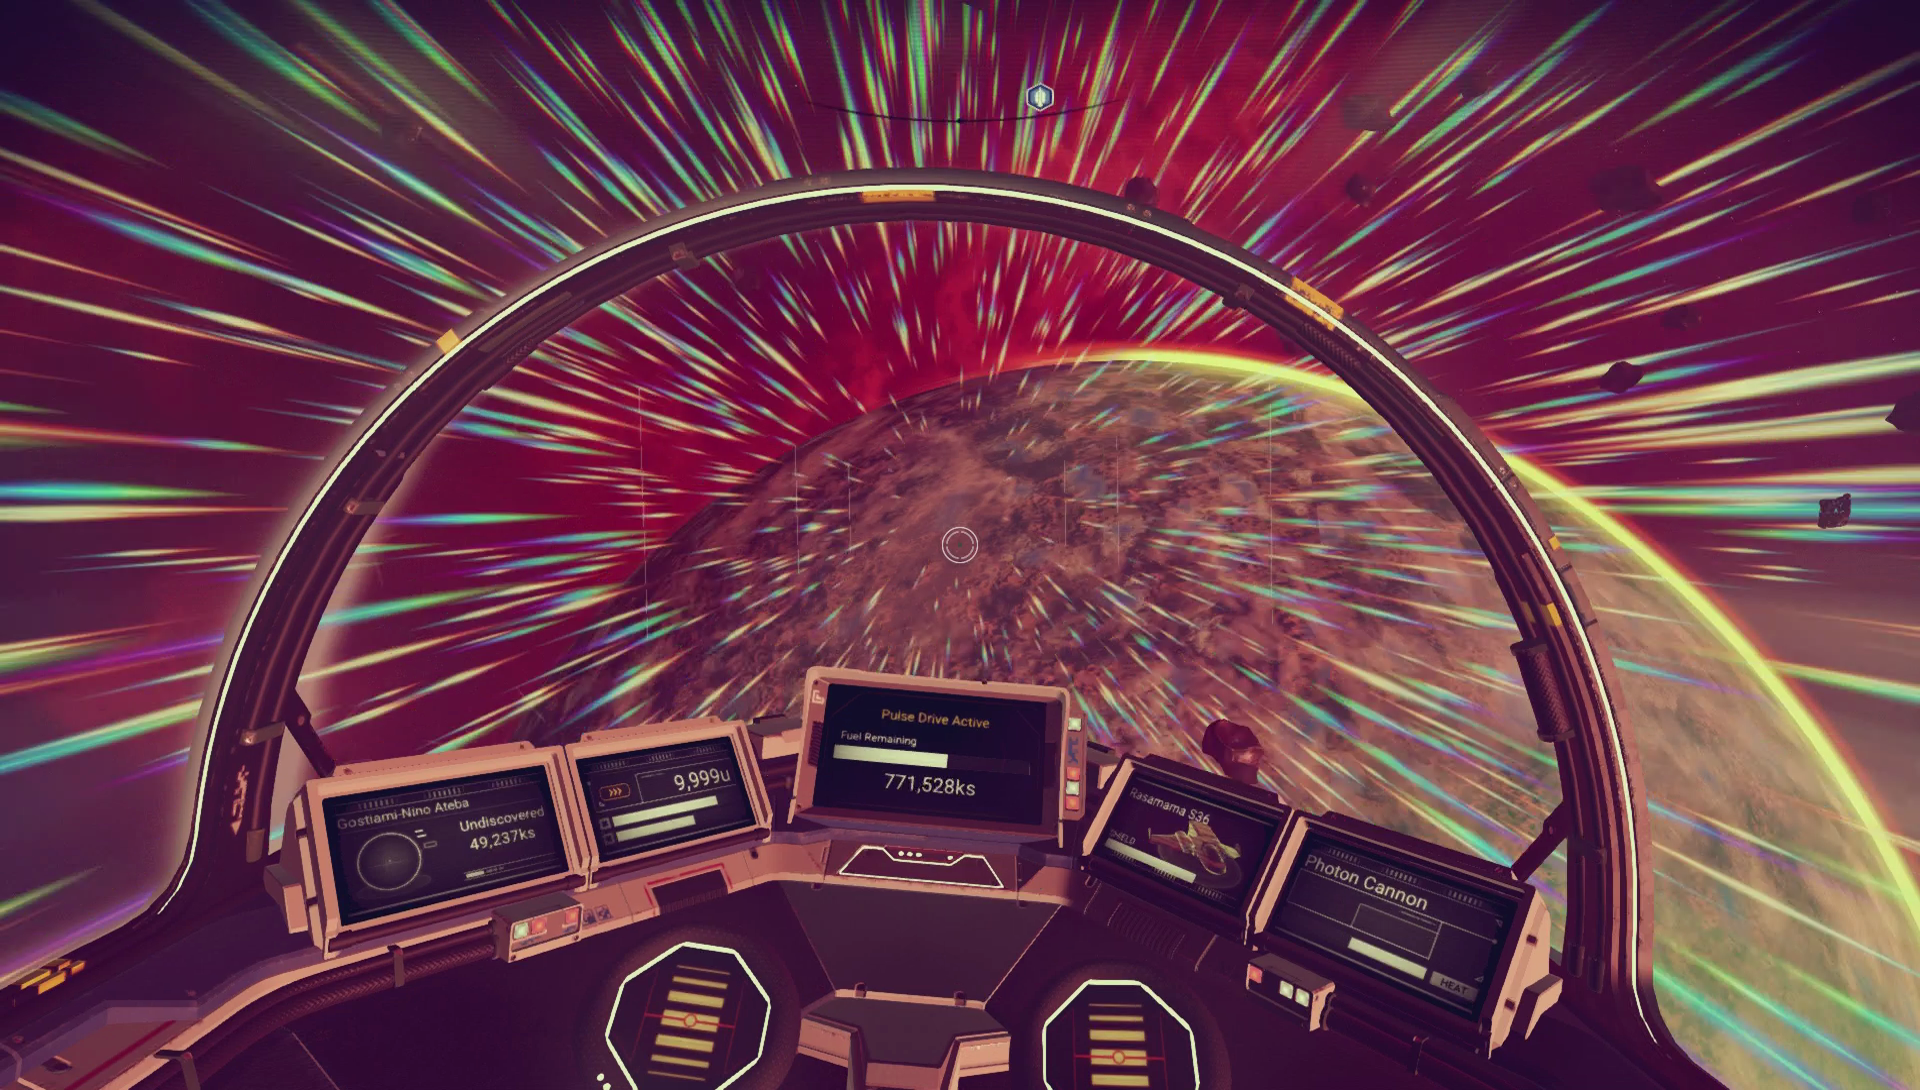  No Man's Sky Beyond PS4 Playstation 4 : Video Games